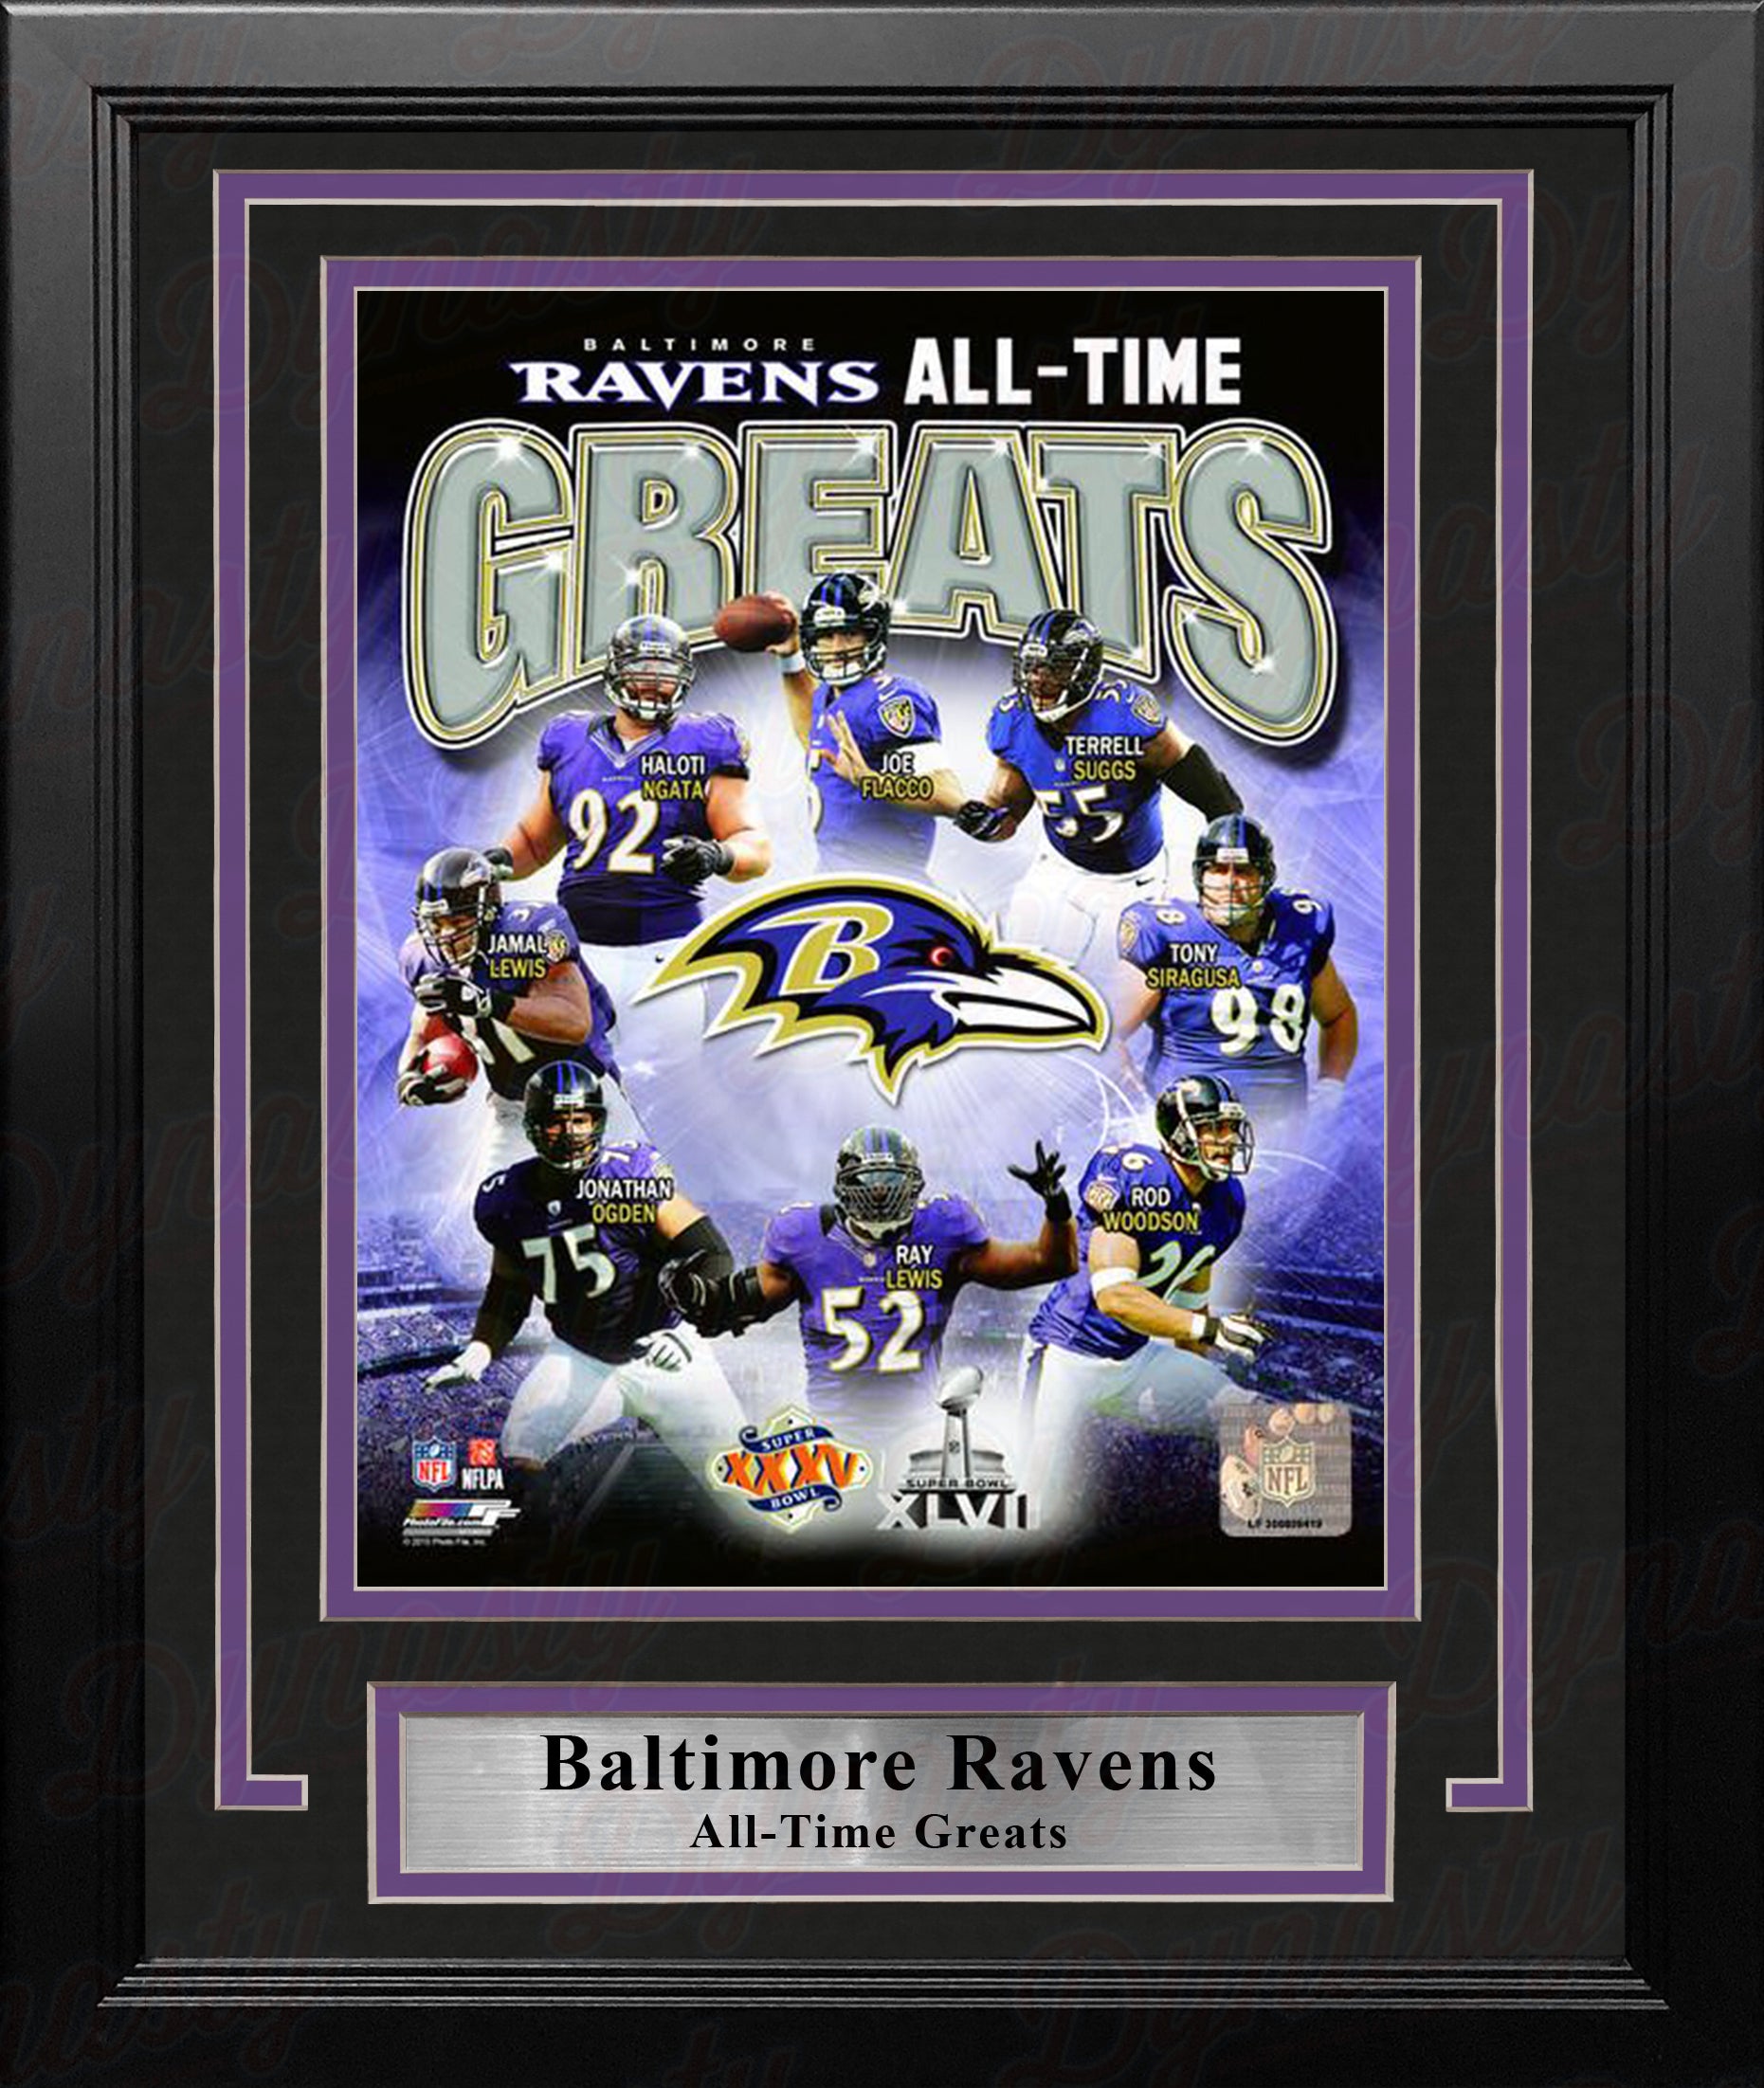 Baltimore Ravens on X: The newest Ravens. 